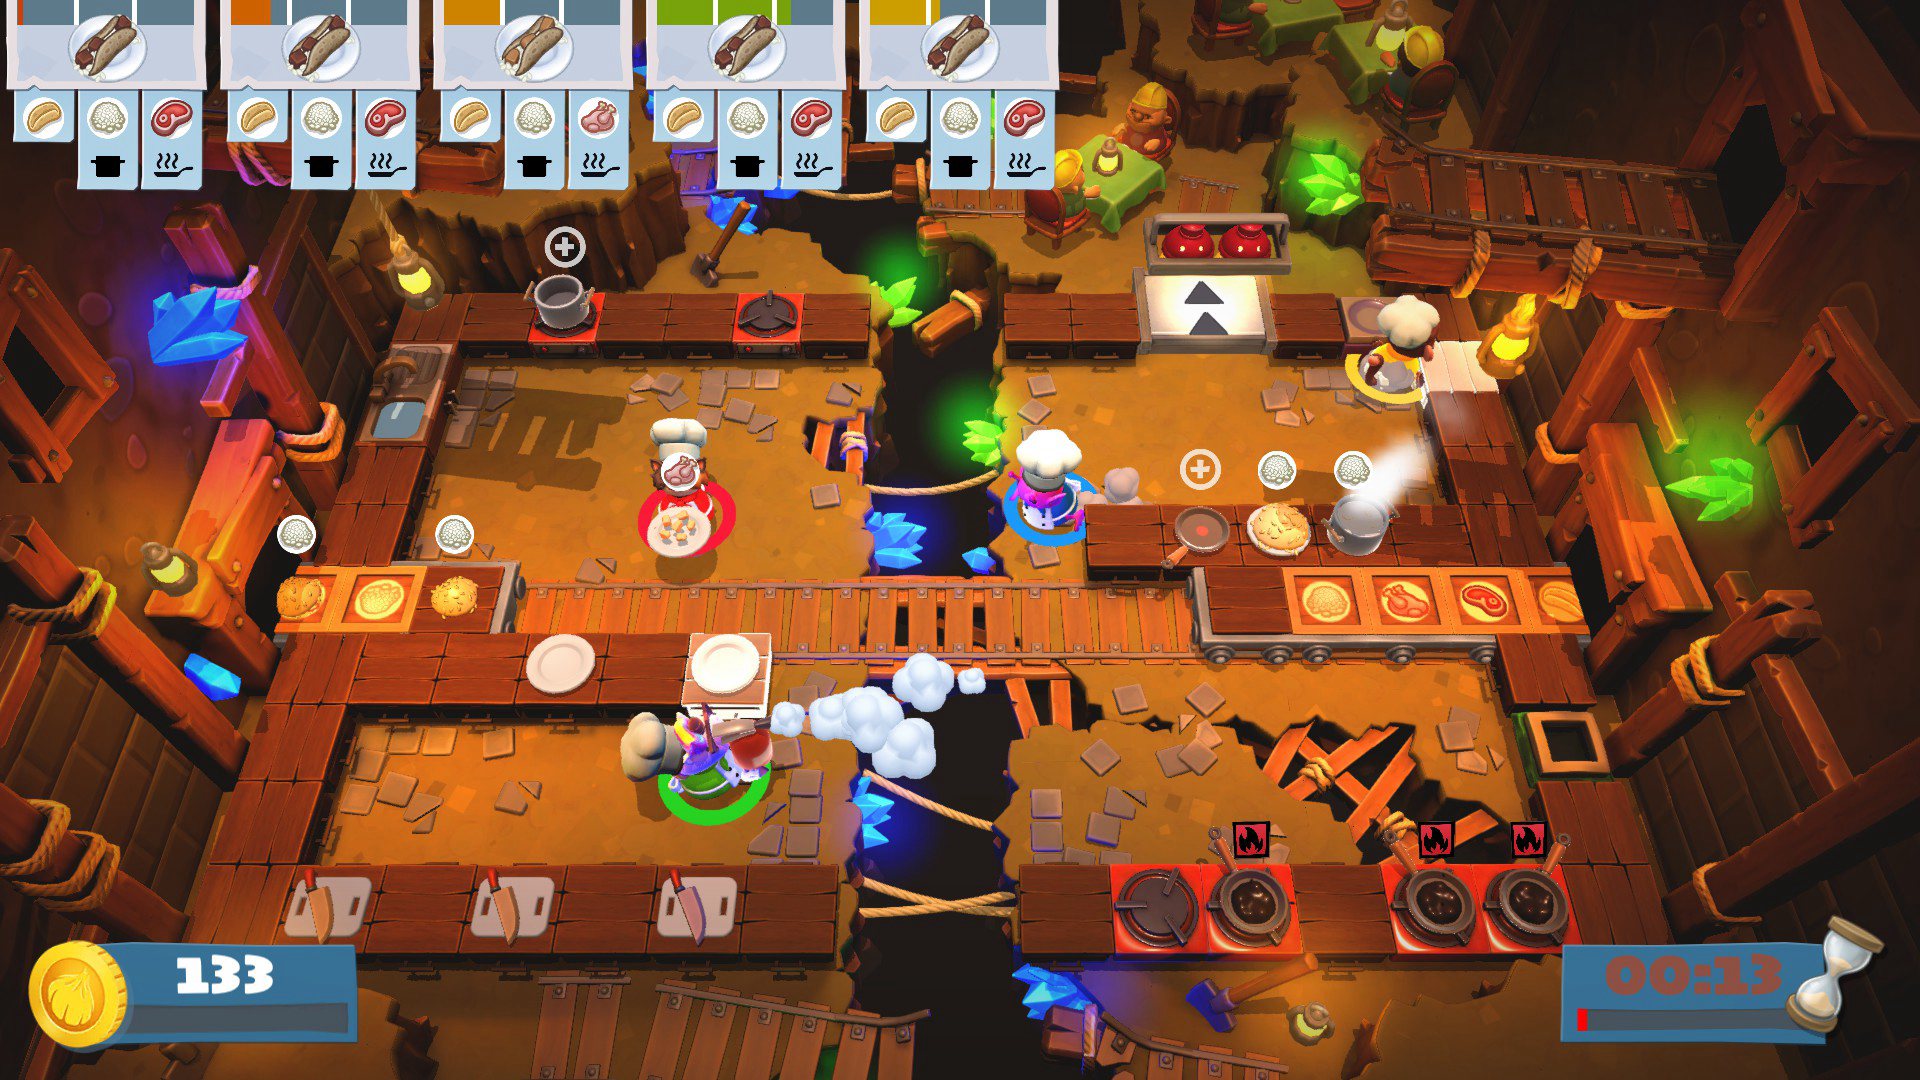 Overcooked! 2 - Too Many Cooks Pack DLC US Steam CD Key